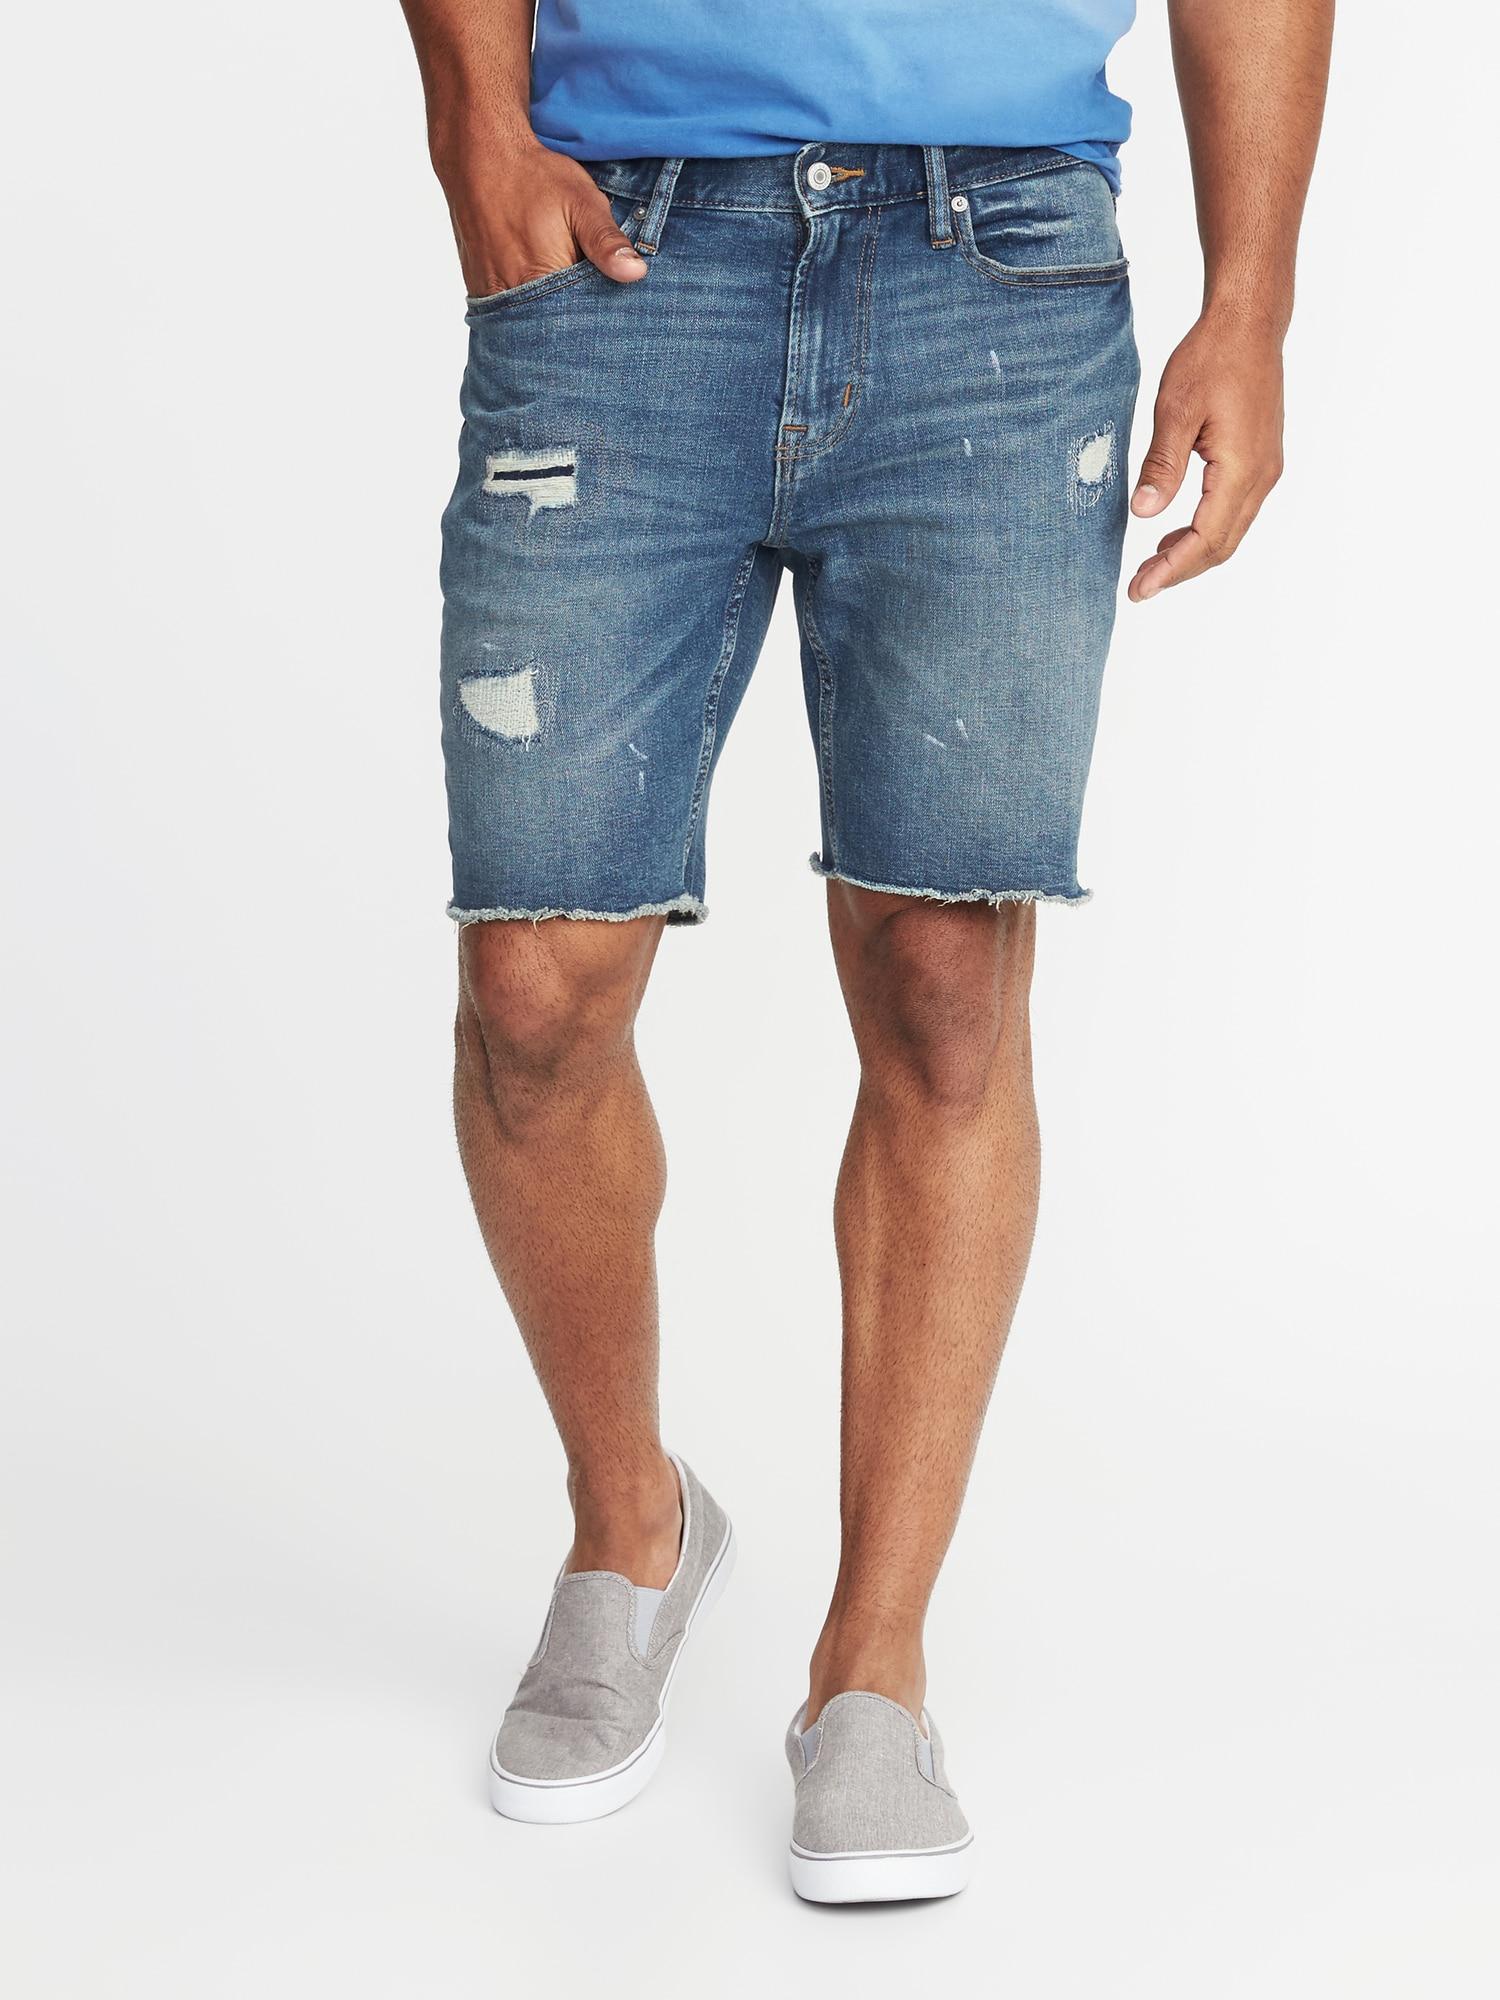 old navy mens jeans shorts